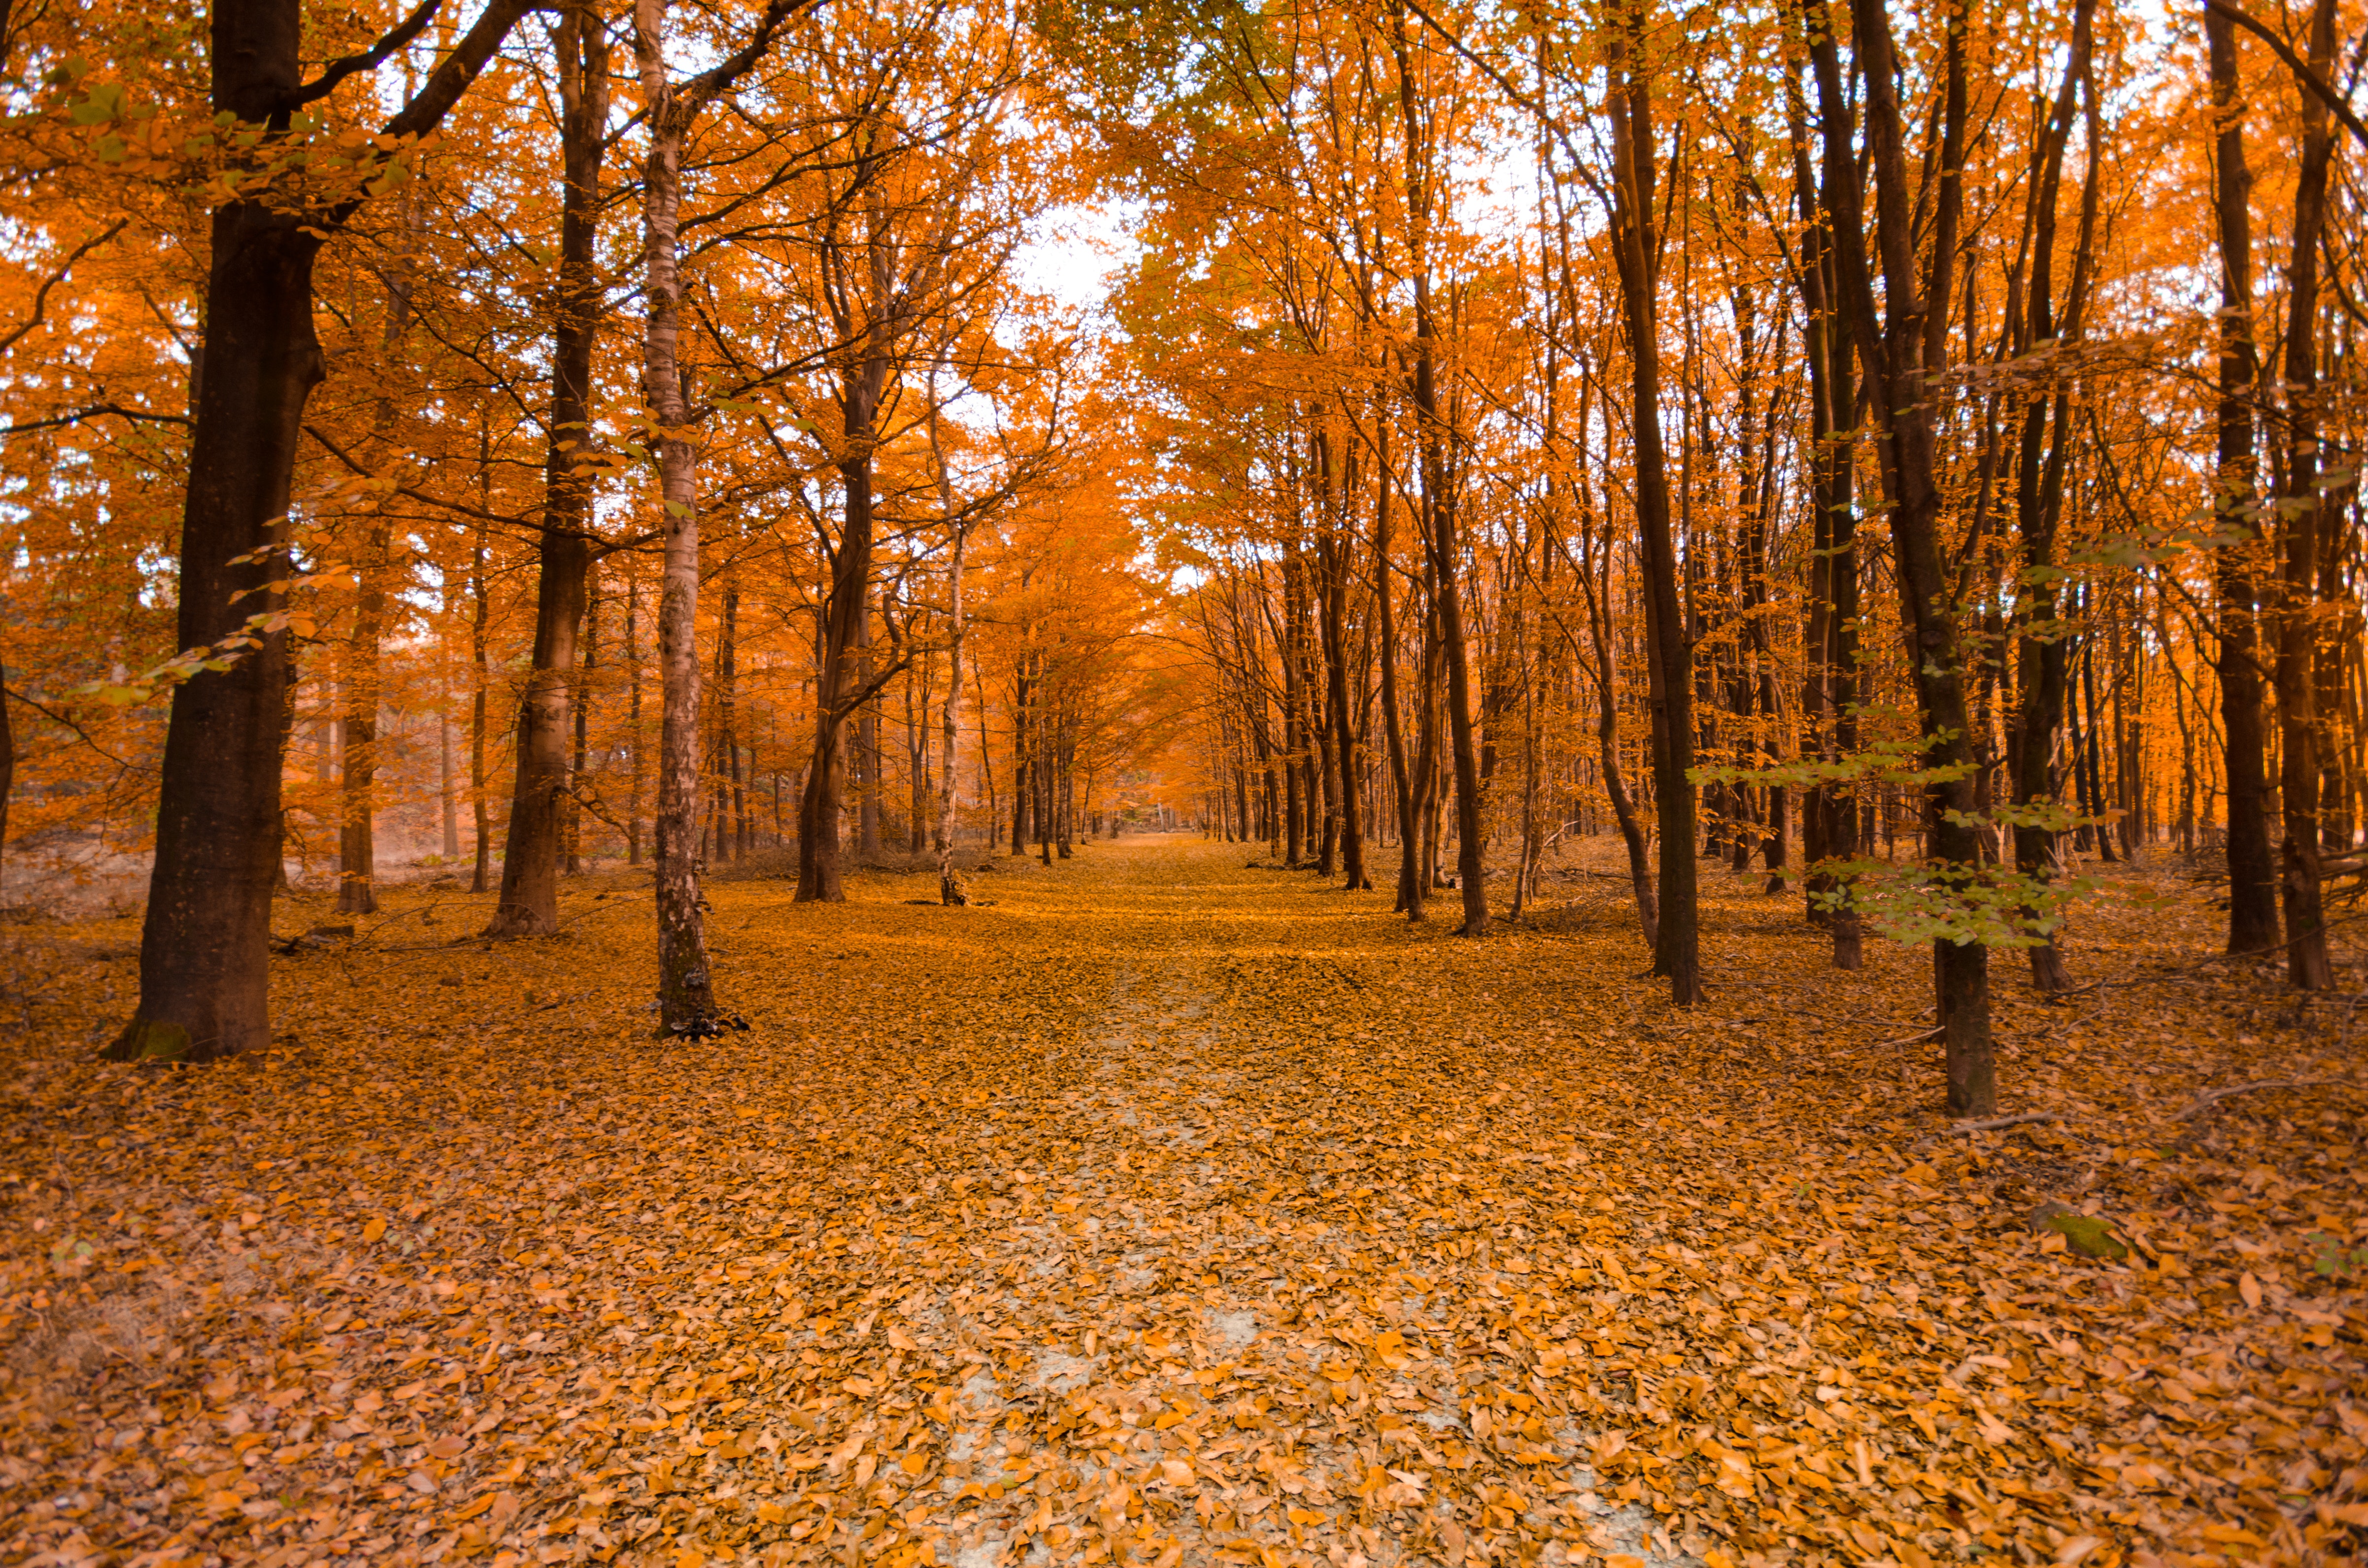 Trees during Fall, Autumn, Mist, Woods, Trees, HQ Photo